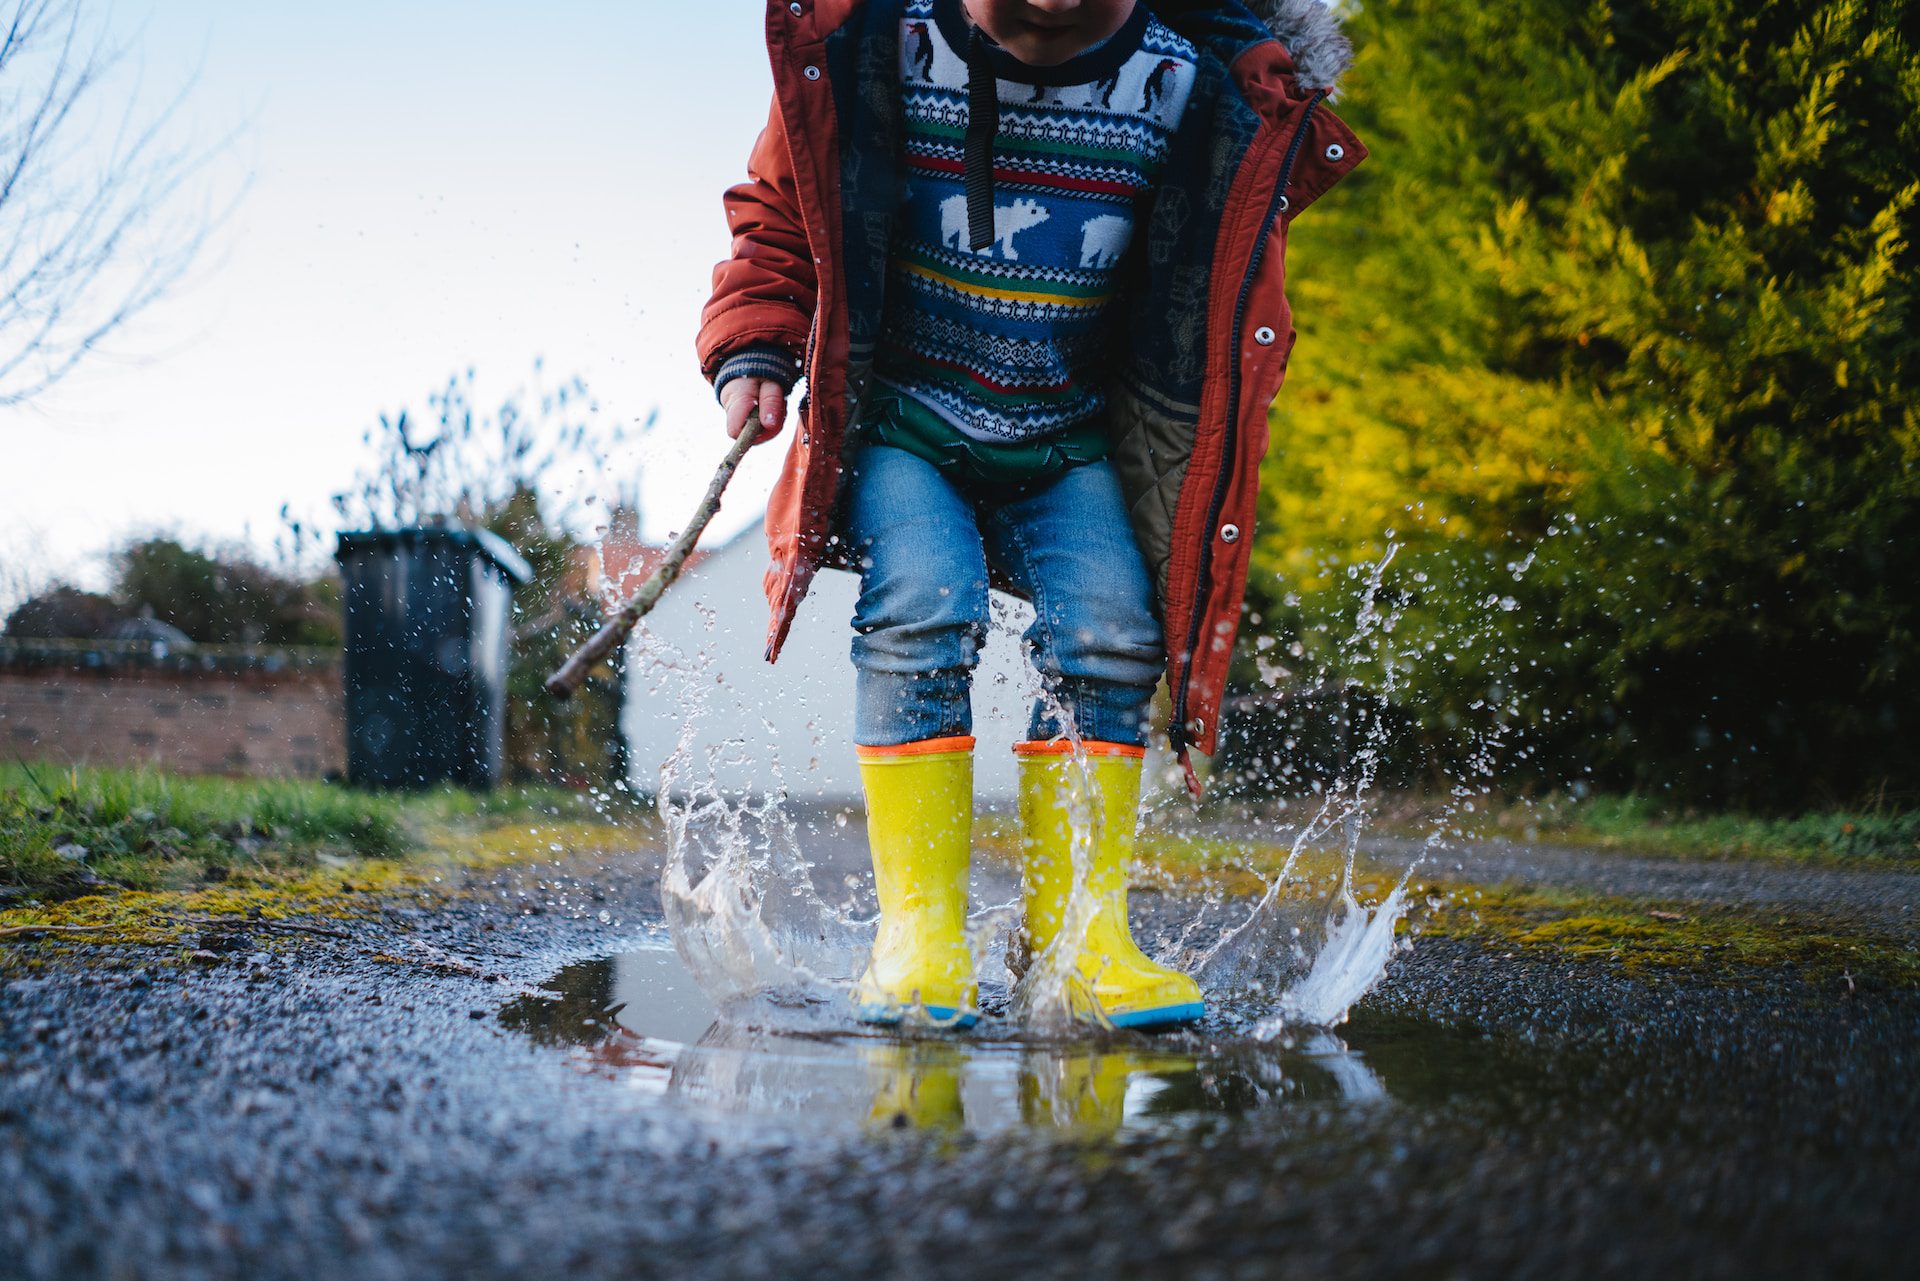 A picture of a young child enjoying jupingin muddy puddles.